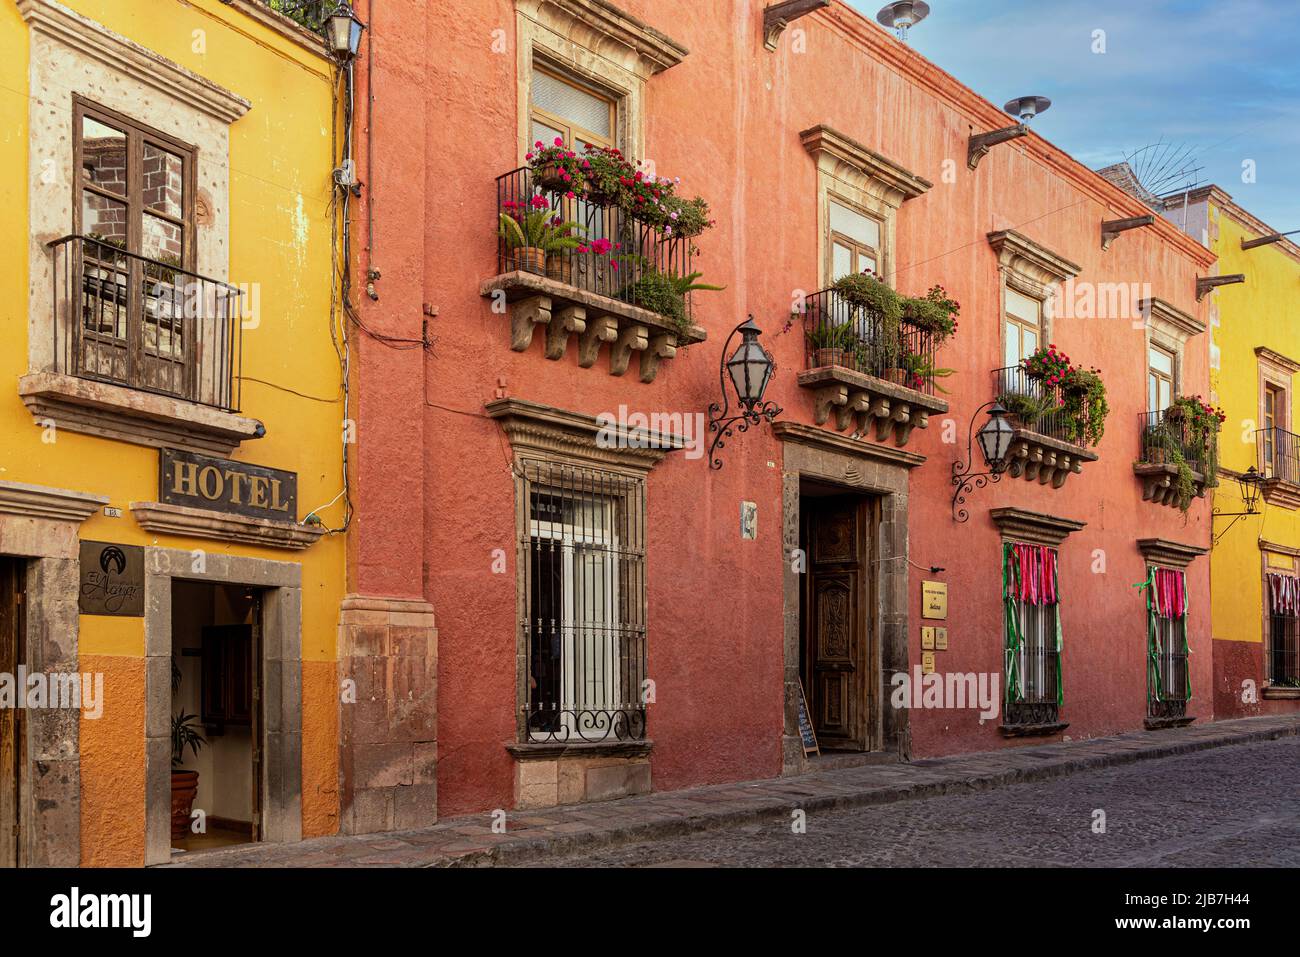 A row of houses and apartment buildings painted in earth tone shades and colors. San Miguel de Allande. Stock Photo